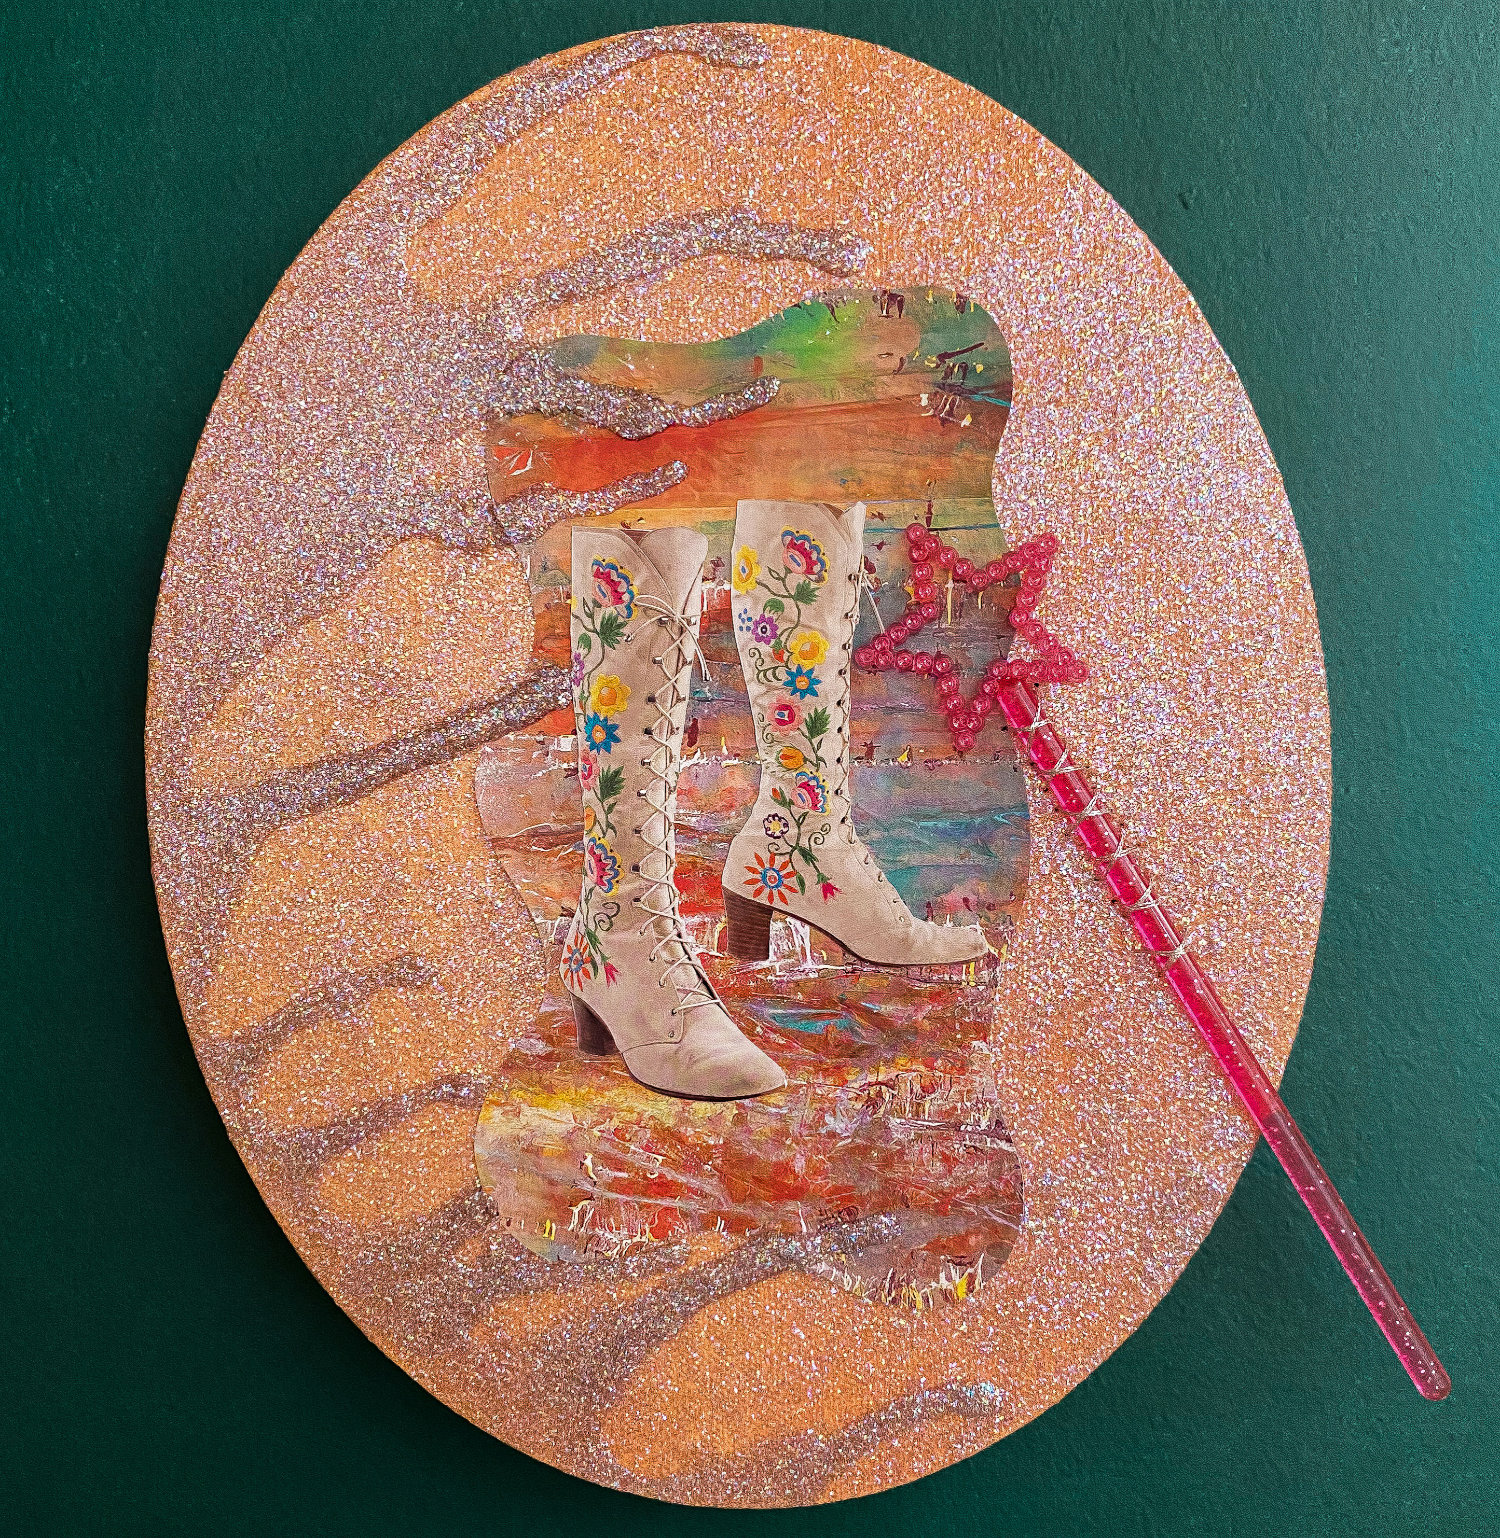 An oval-shaped piece of collage-art shown against a green background. The surface of the piece has an orange-pink color with a glitter finish. In the center there's a picture of a pair of women's boots with colorful floral patterns along the site and attached to the piece is a child's magic wand toy with a star-shaped tip.